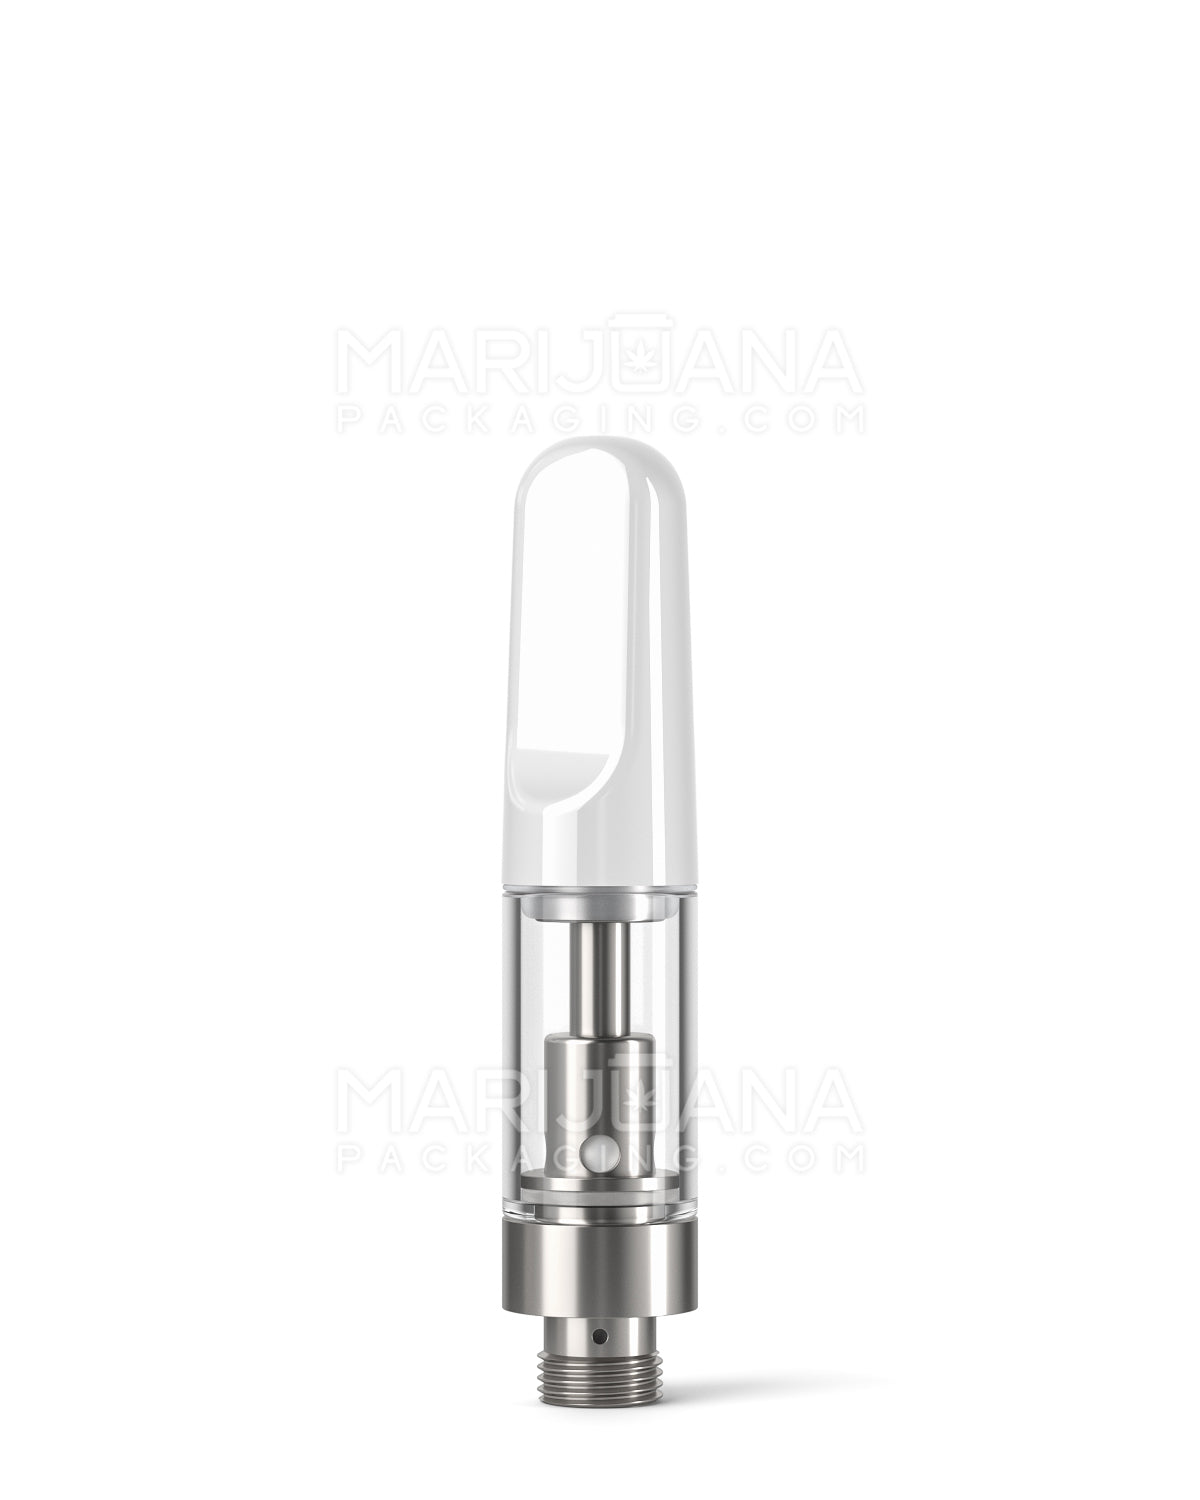 CCELL | Liquid6 Reactor Glass Vape Cartridge with White Ceramic Mouthpiece | 0.5mL - Screw On - 100 Count - 1